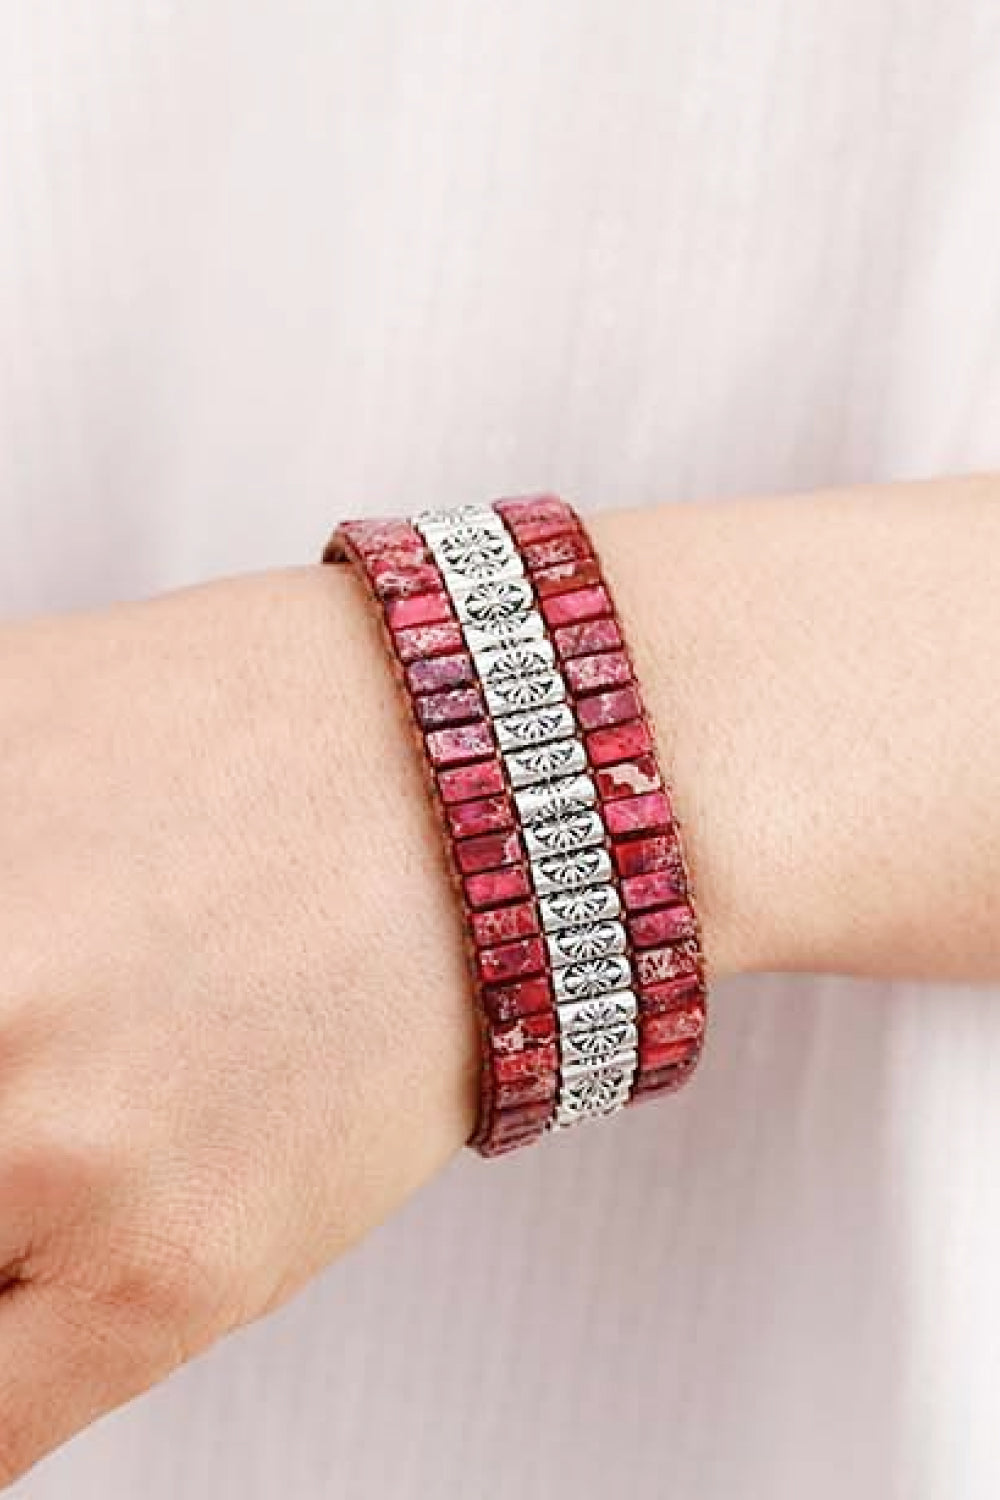 Handmade Triple Layer Natural Stone Bracelet Print on any thing USA/STOD clothes